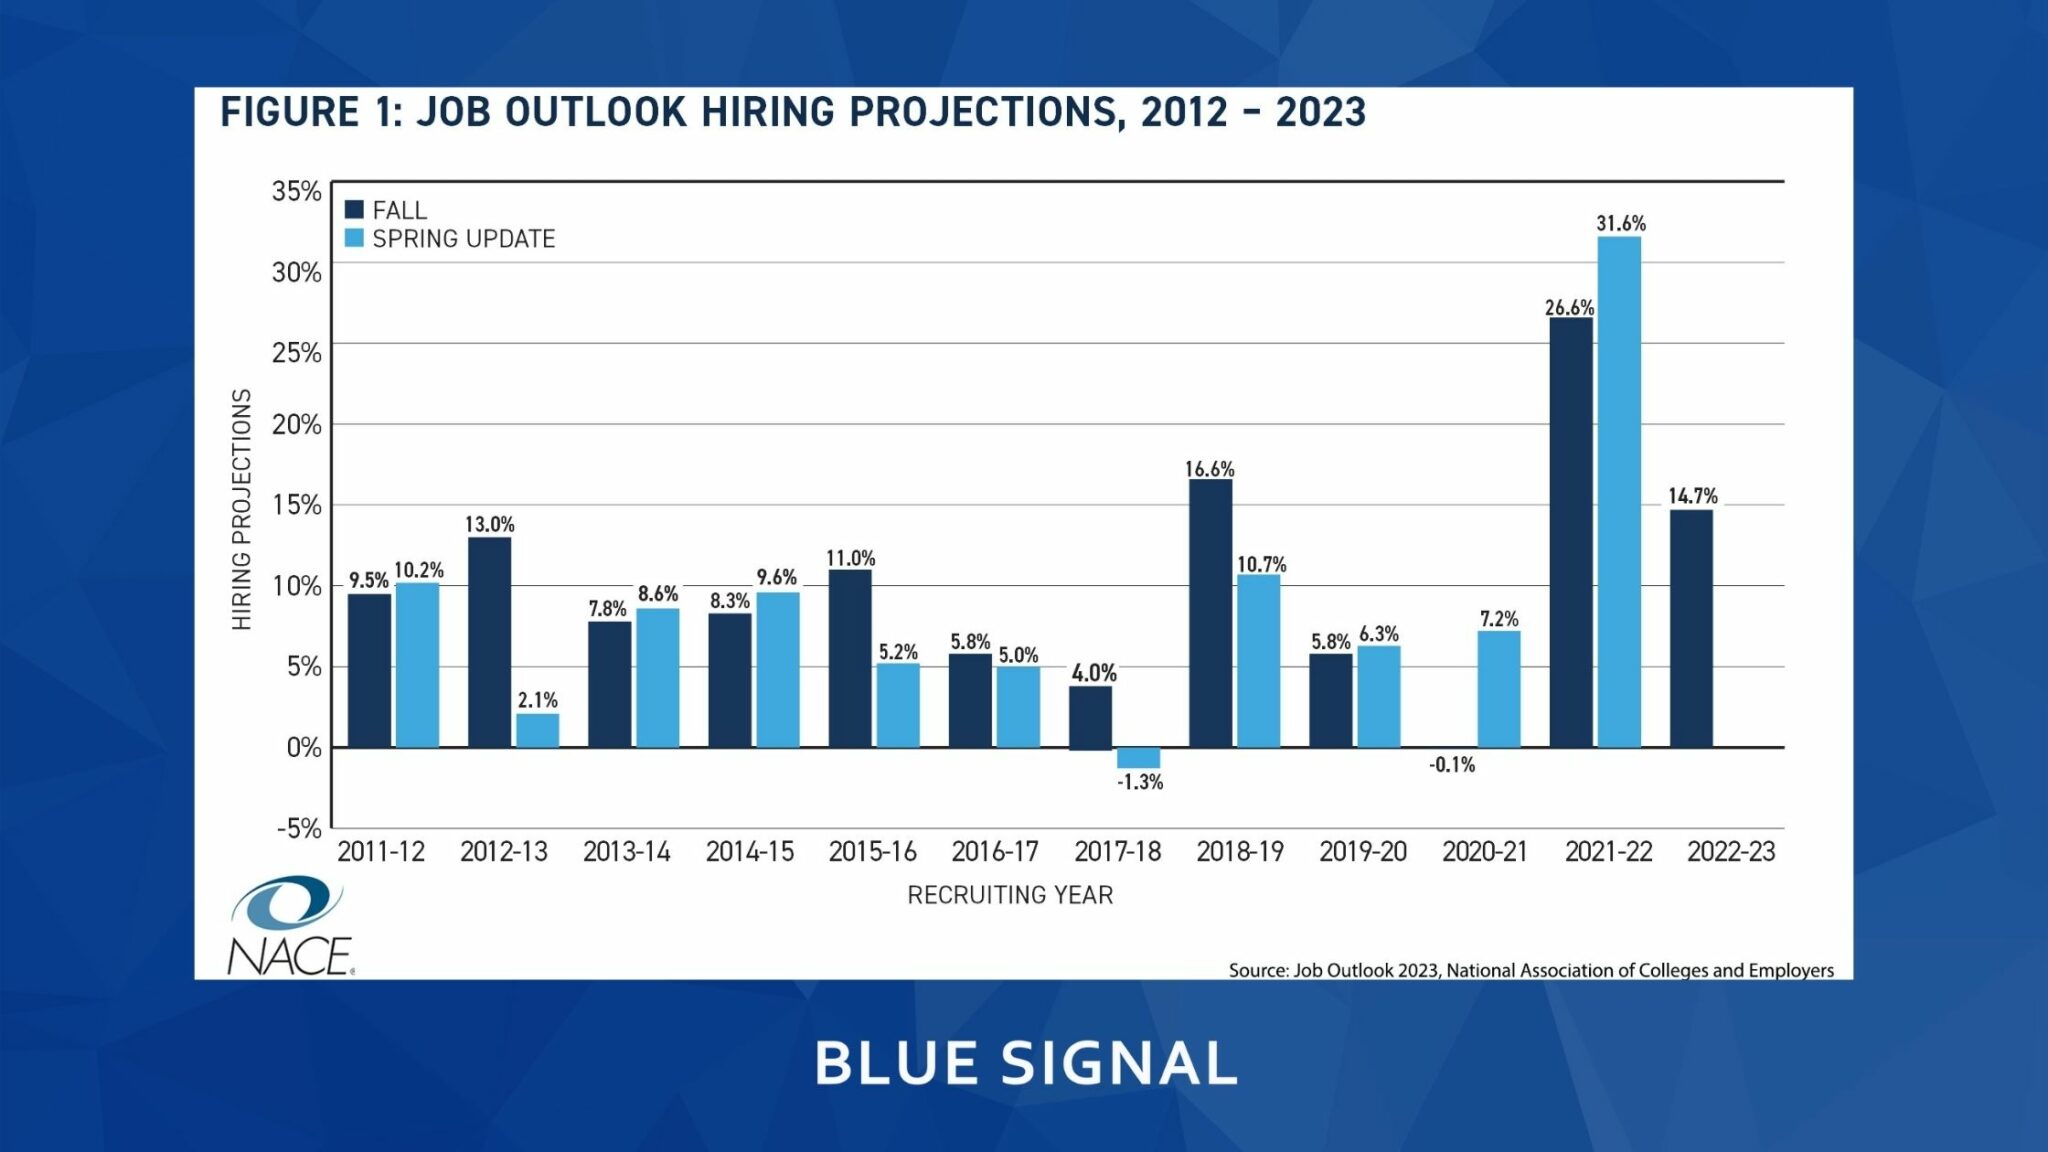 Bar grpah showing NACE study on hiring trends fro college graduates with 2023 outlook